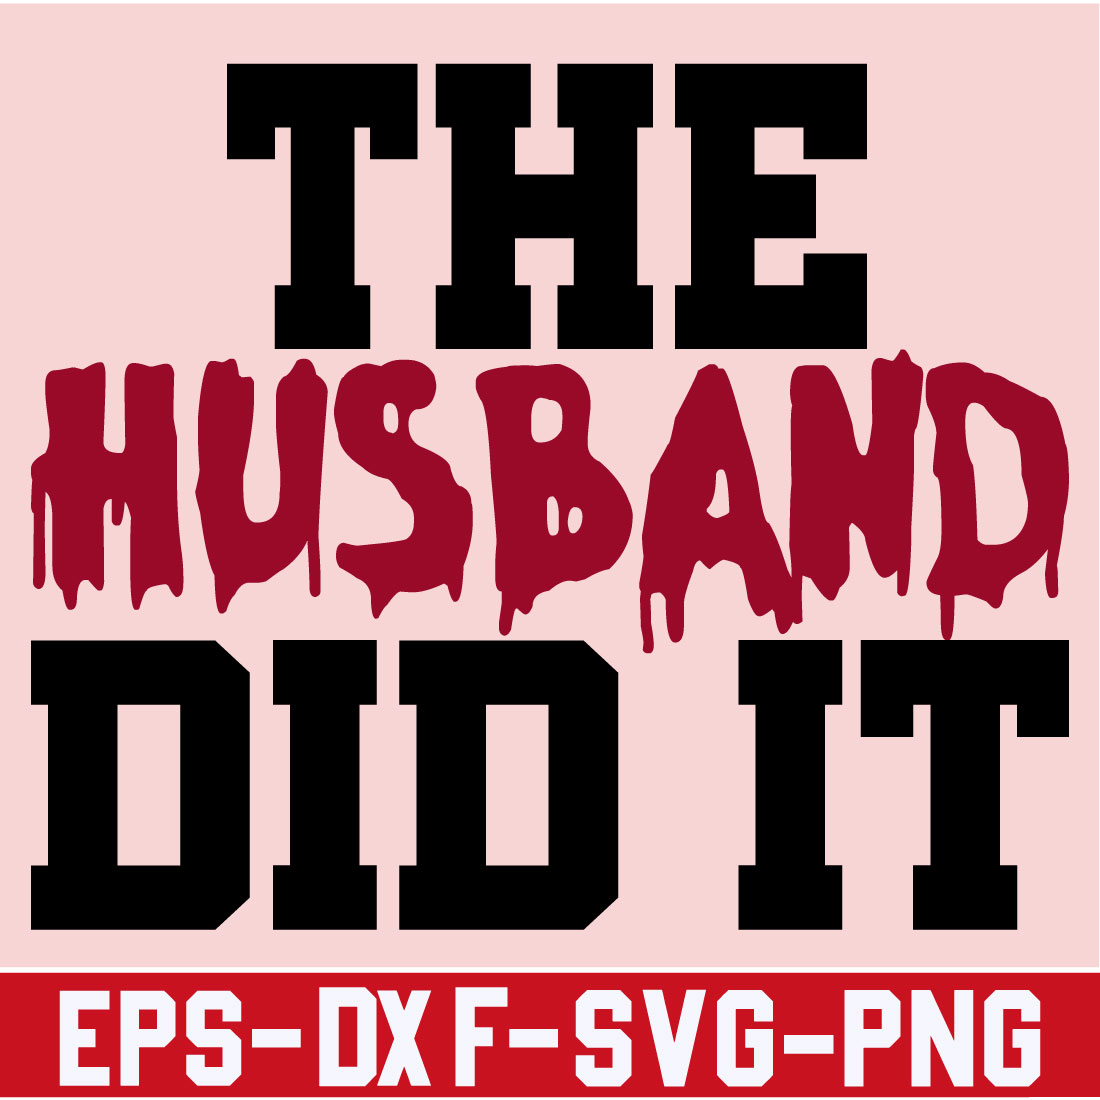 The Husband did it preview image.